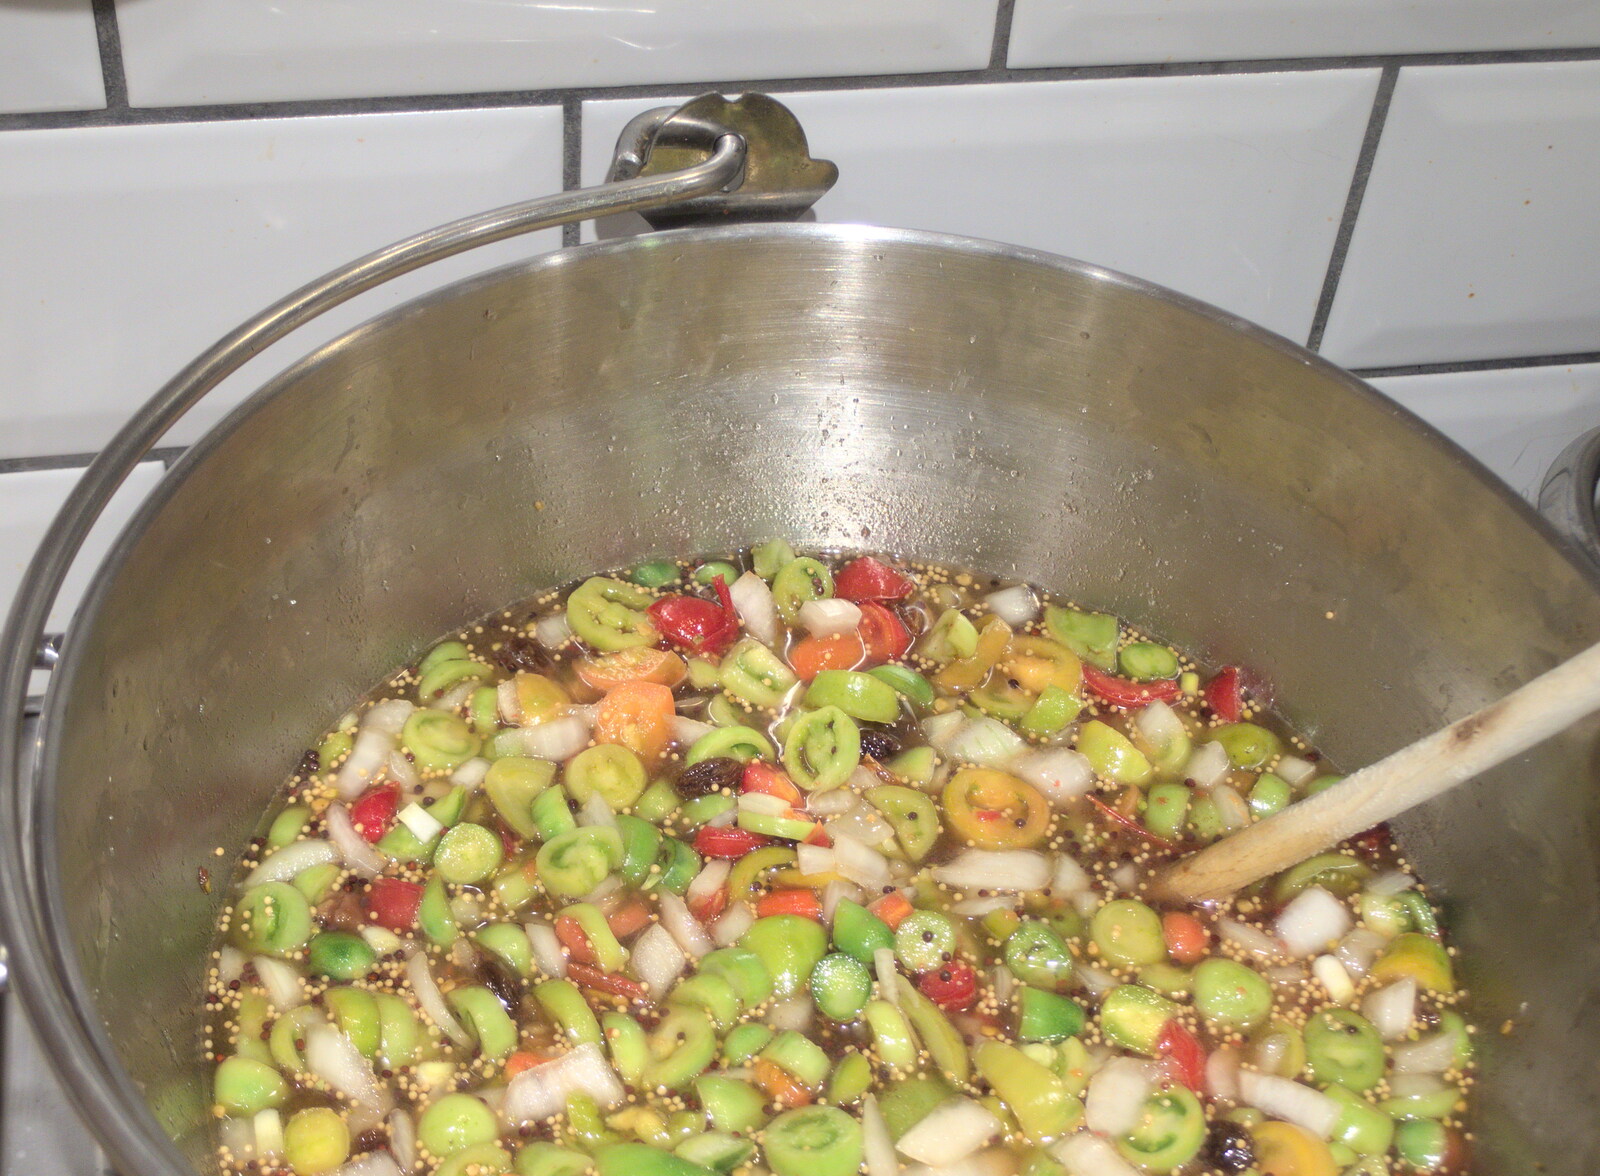 It's time to do some green tomato chutney from Lunch in Norwich and the GSB at Gislingham, Suffolk - 26th November 2022